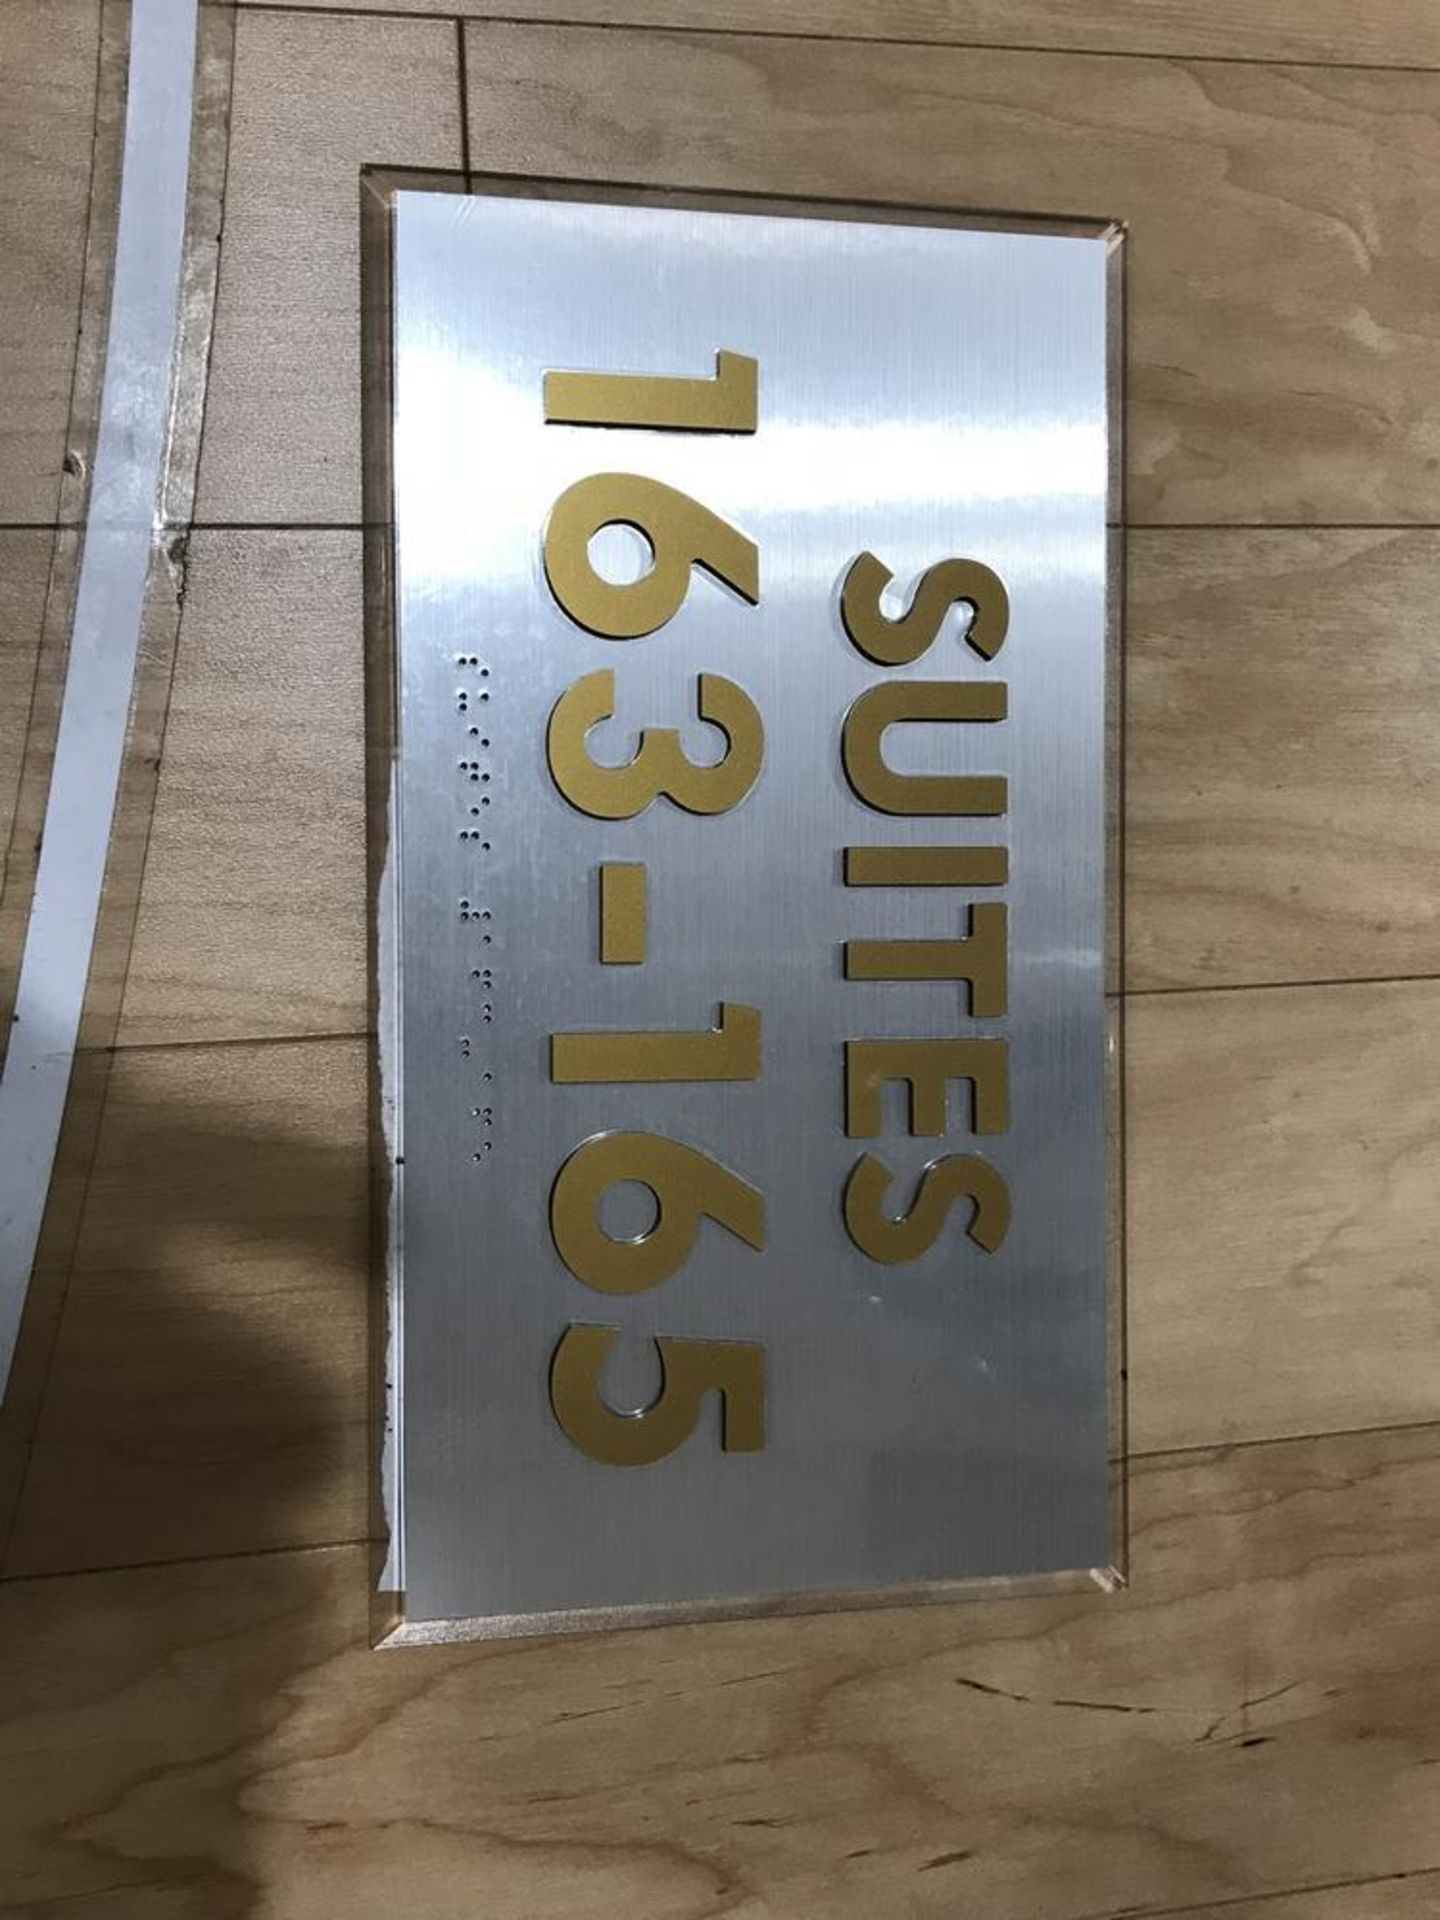 Suites Sign "163-165" , Dim. 12 in x 7 in , Location: Level #100 ***Note from Auctioneer***This